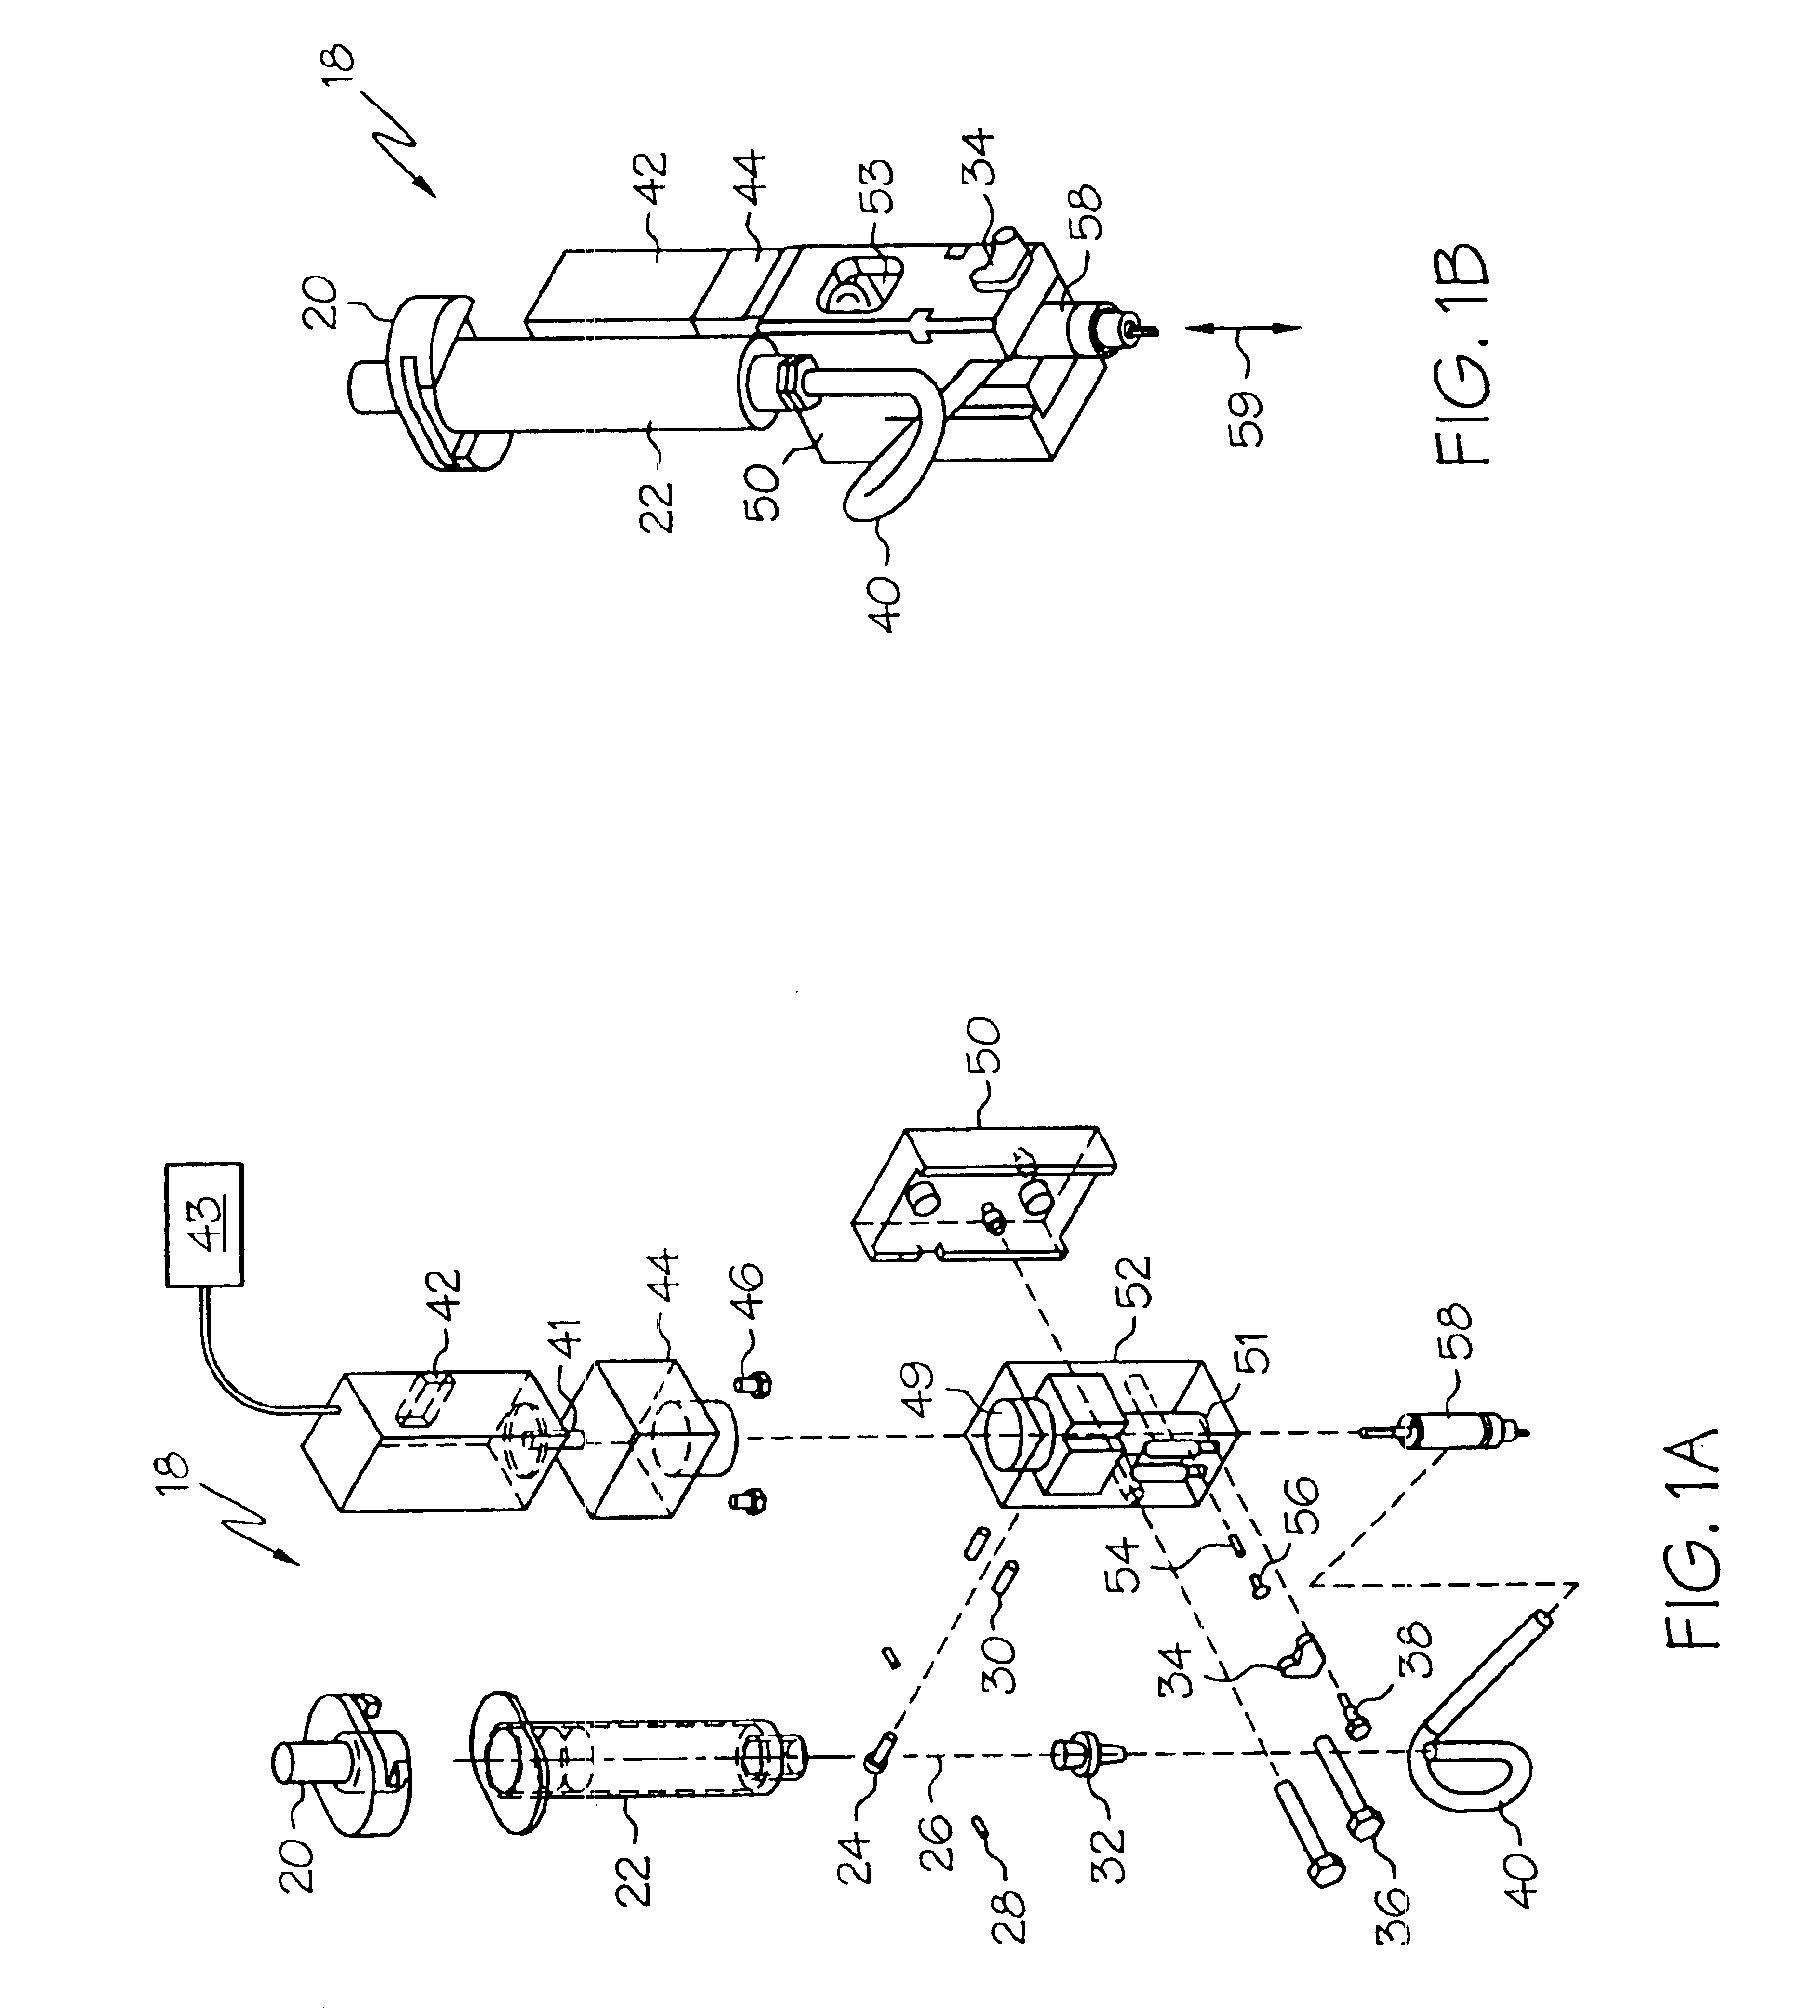 System and method for control of fluid dispense pump